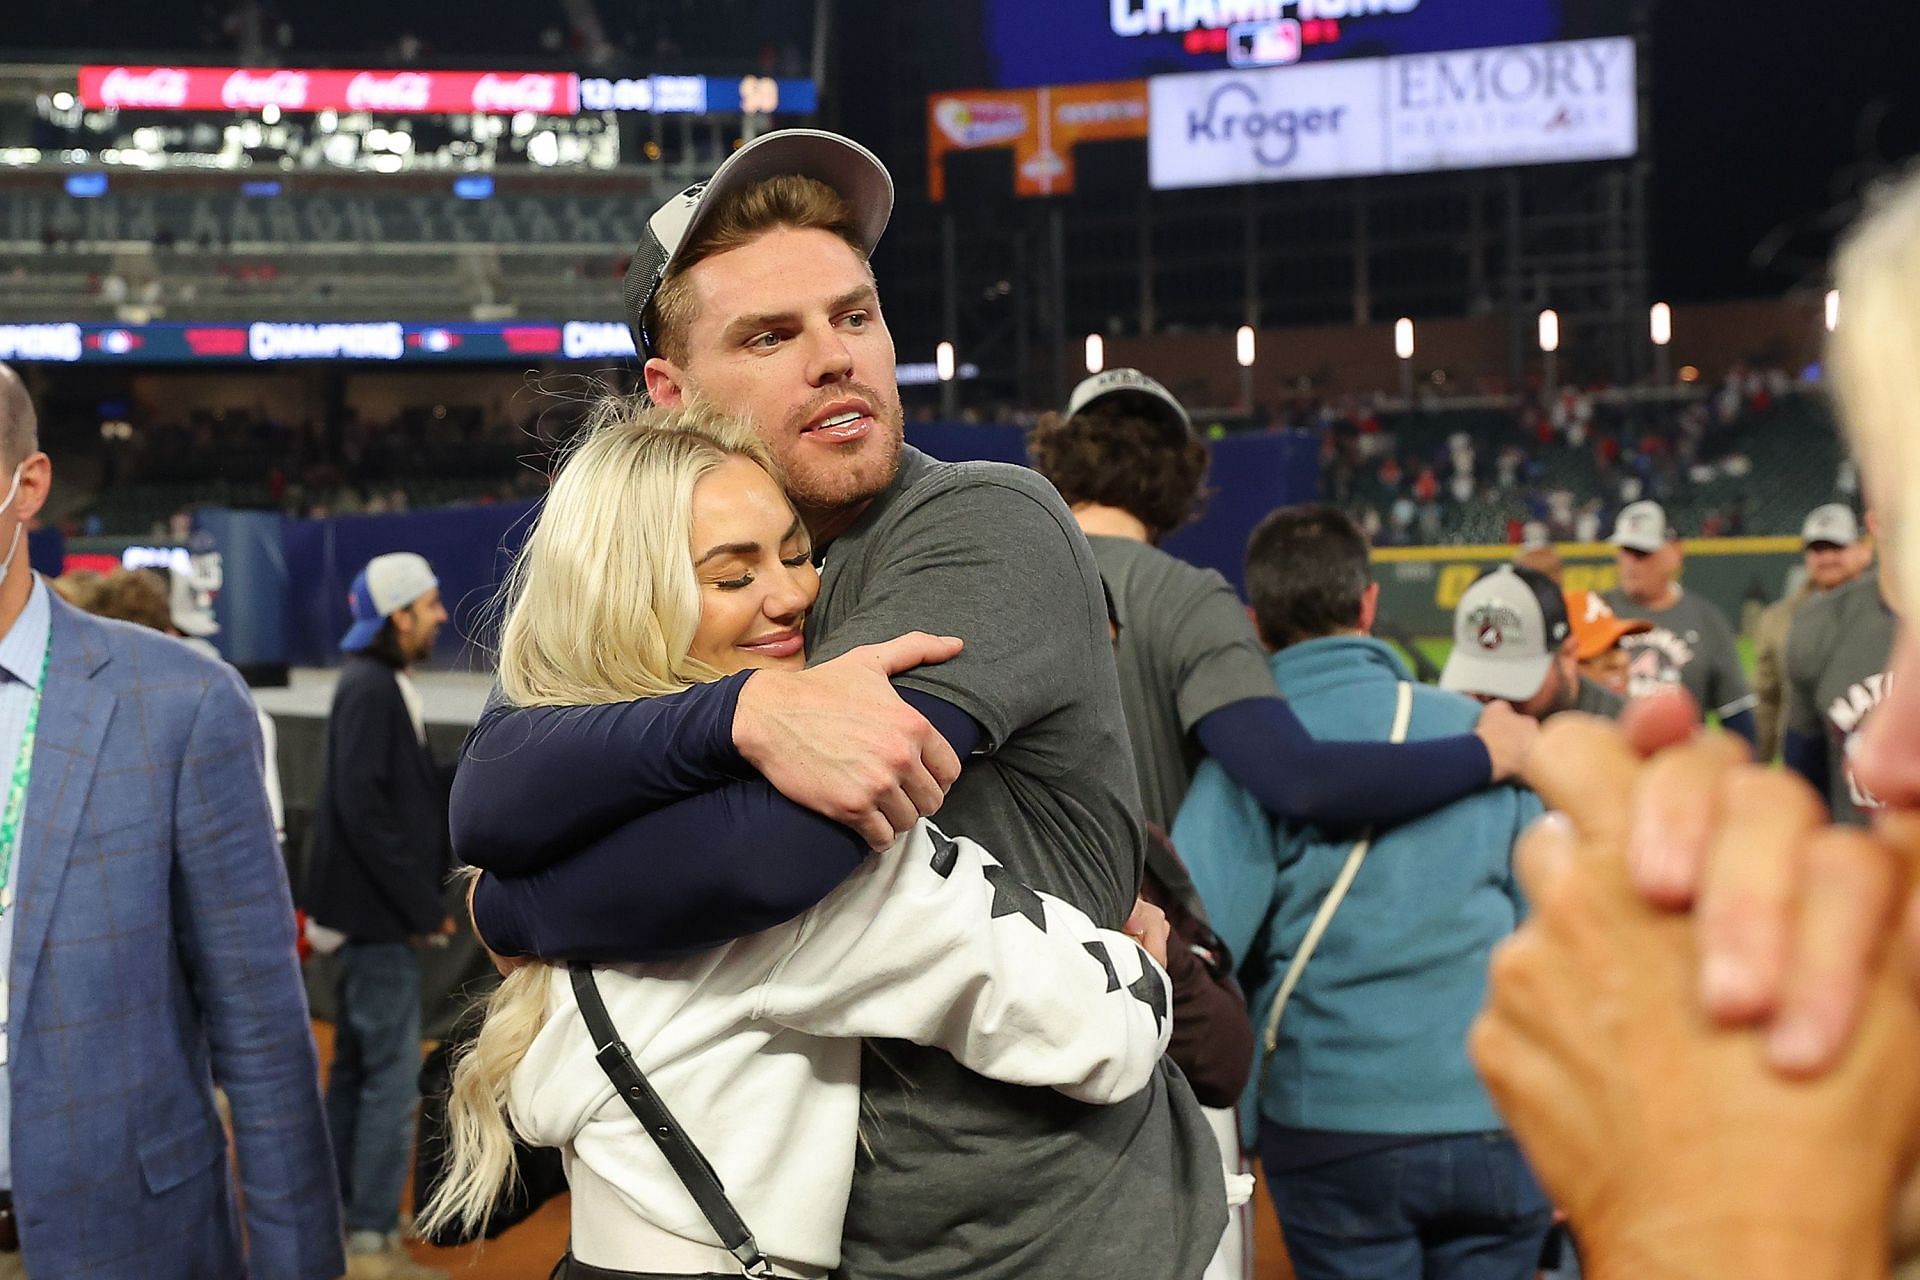 Freddie Freeman and wife Chelsea Freeman celebrate eight year anniversary,  Chelsea says I couldn't imagine life without you